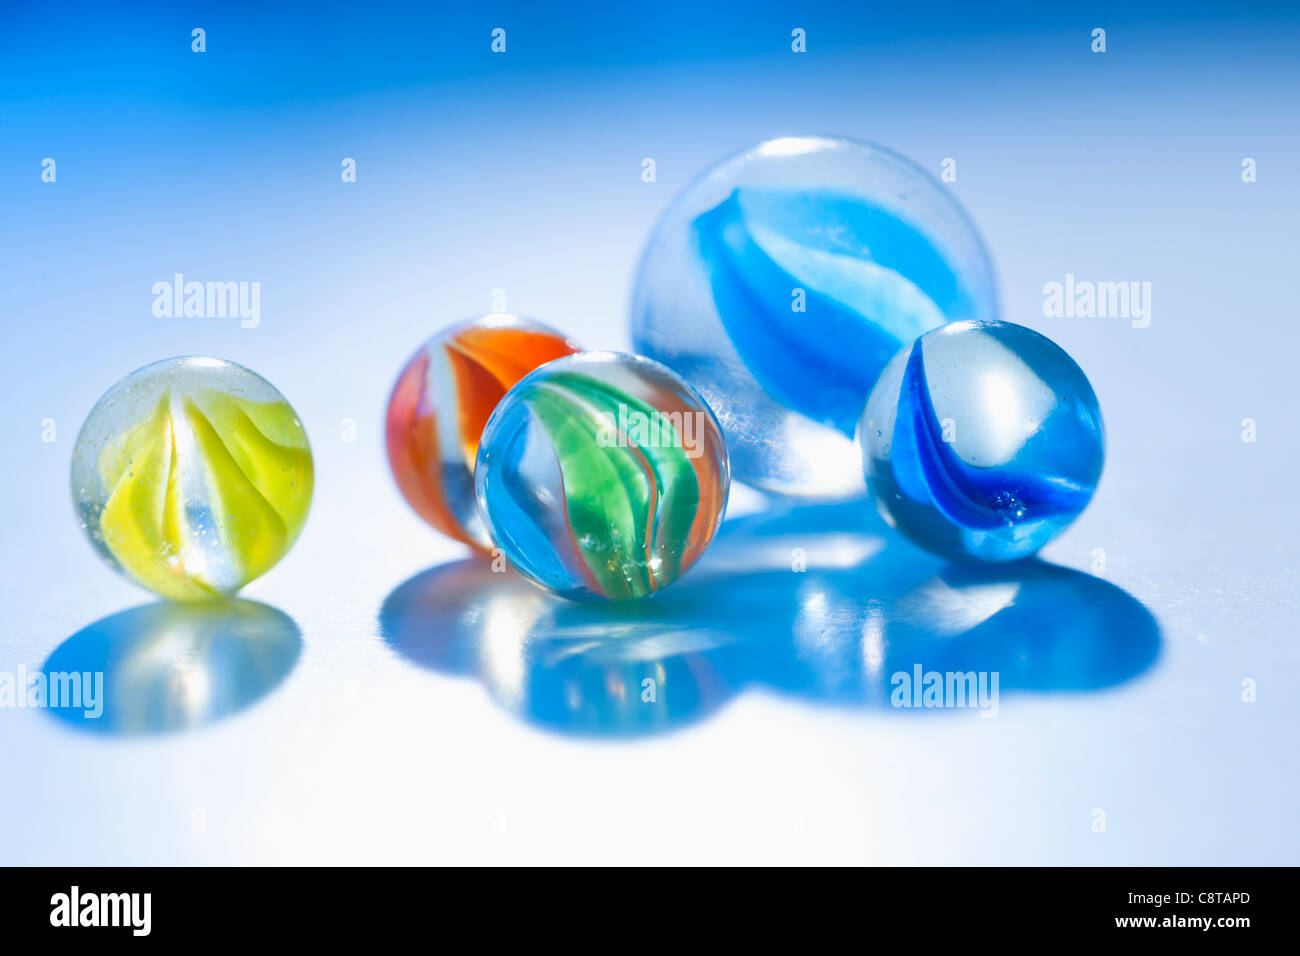 Studio shot of colorful marbles Stock Photo